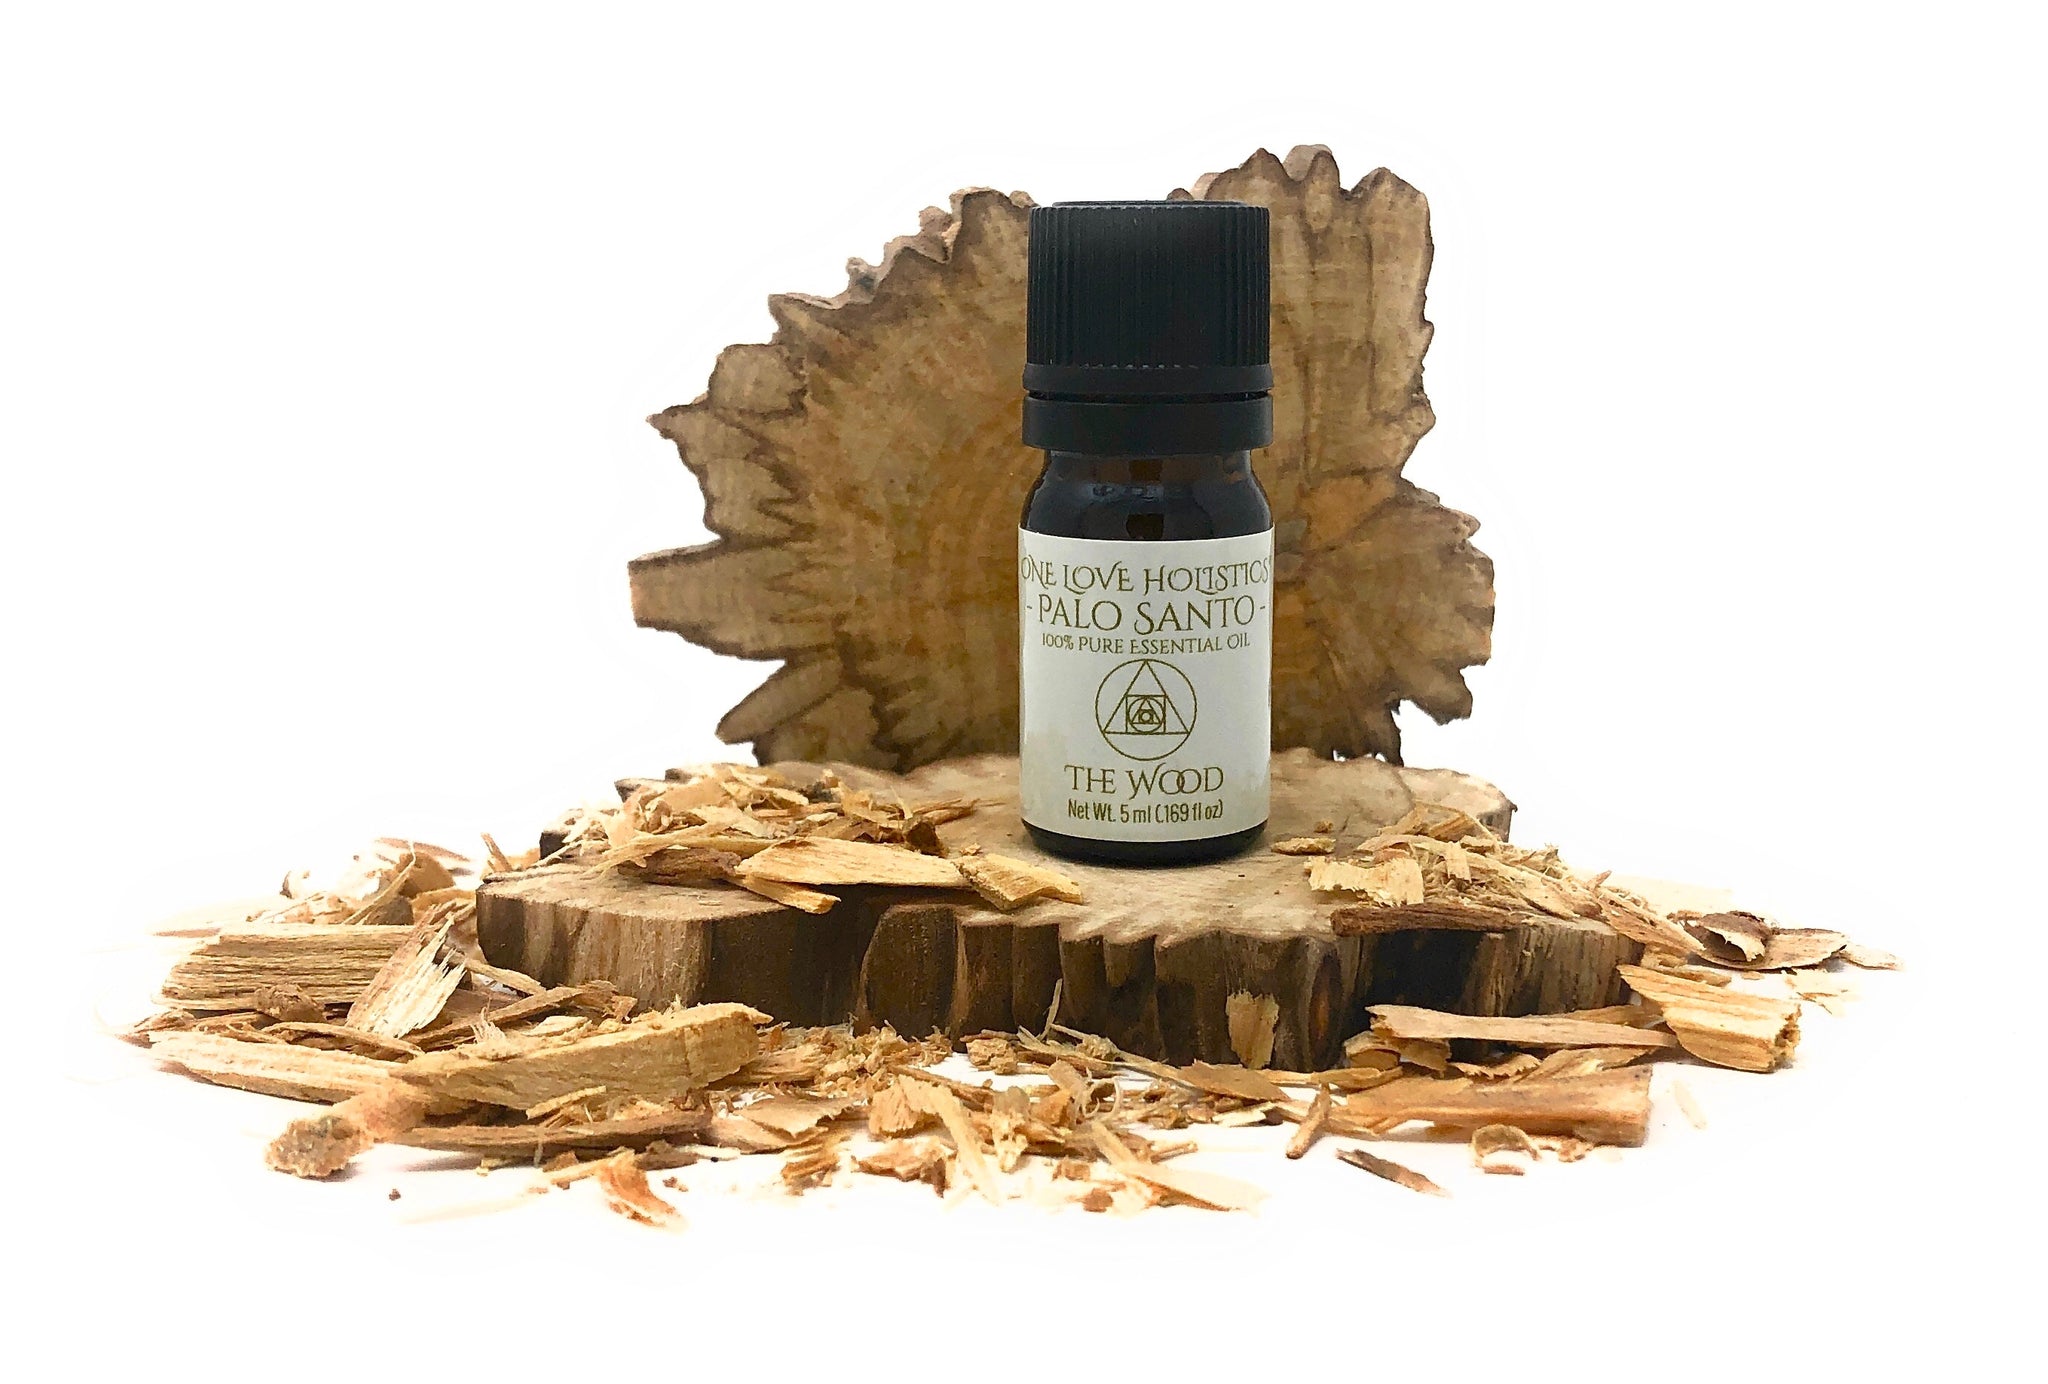 Palo Santo Essential Oil - Pure Organic Essential Oils for Diffuser -  Selecciòn Quality - Palo Santo Oil Ideal for Aromatherapy and Stress Relief  - 30